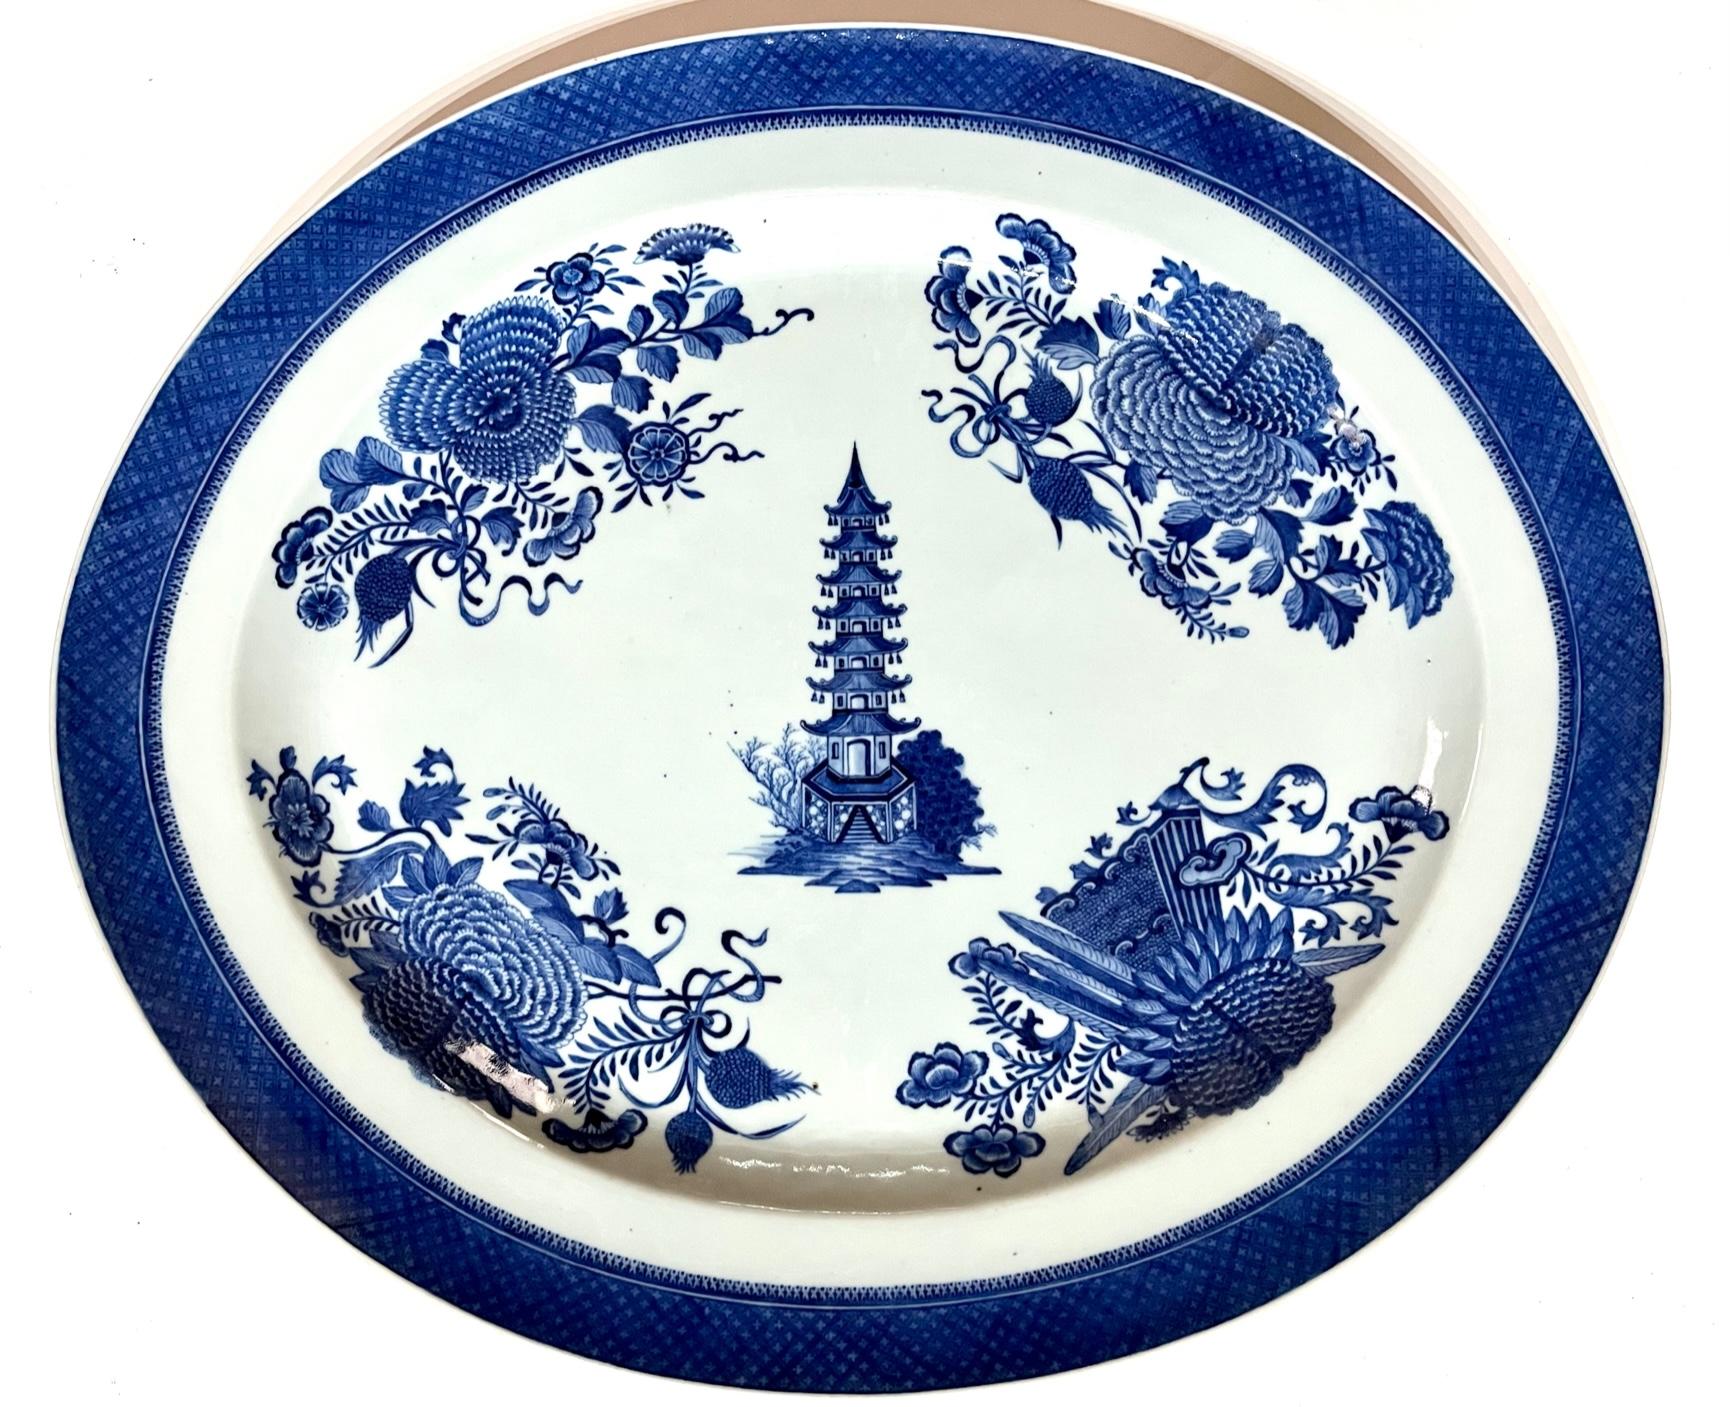 Early 19th Century Chinese Export 'Blue Fitzhugh' Platters from the Cabot-Perkins Service, c. 1812 For Sale